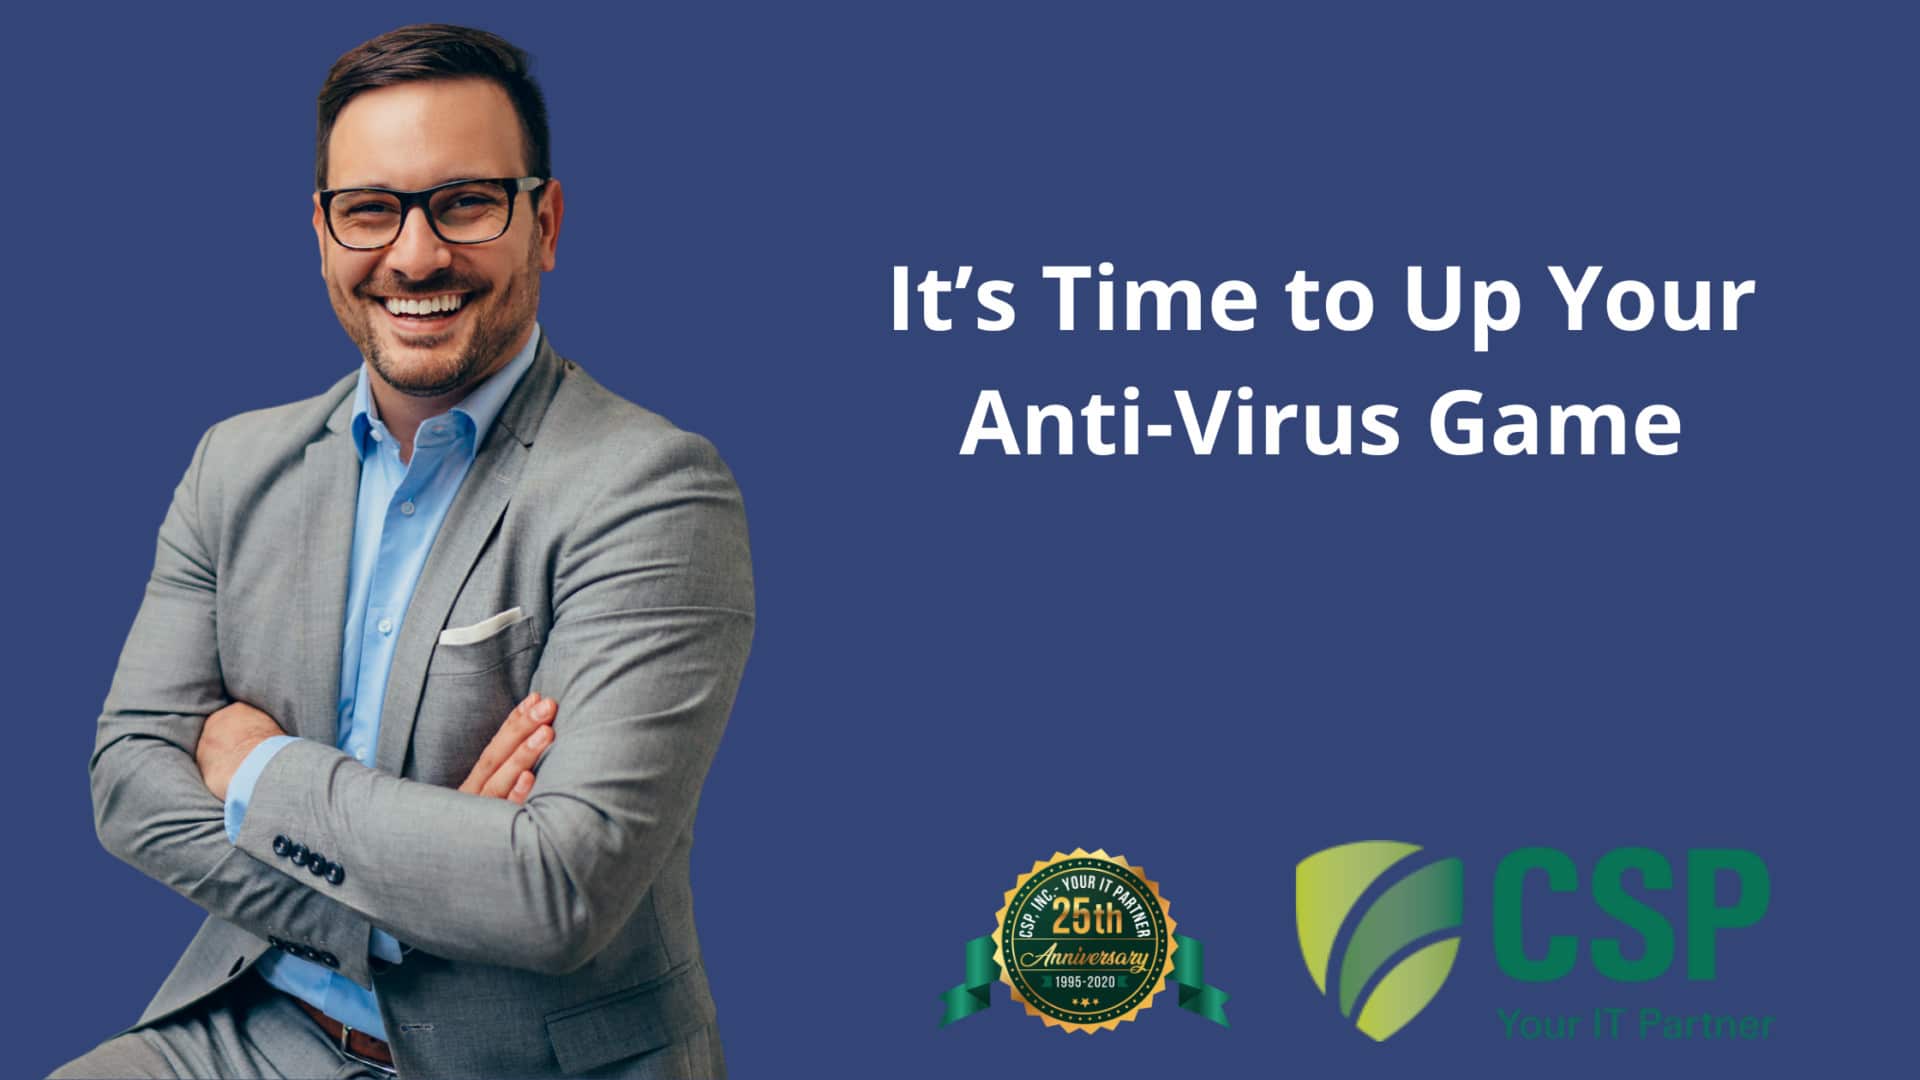 It’s Time to Up Your Anti-Virus Game